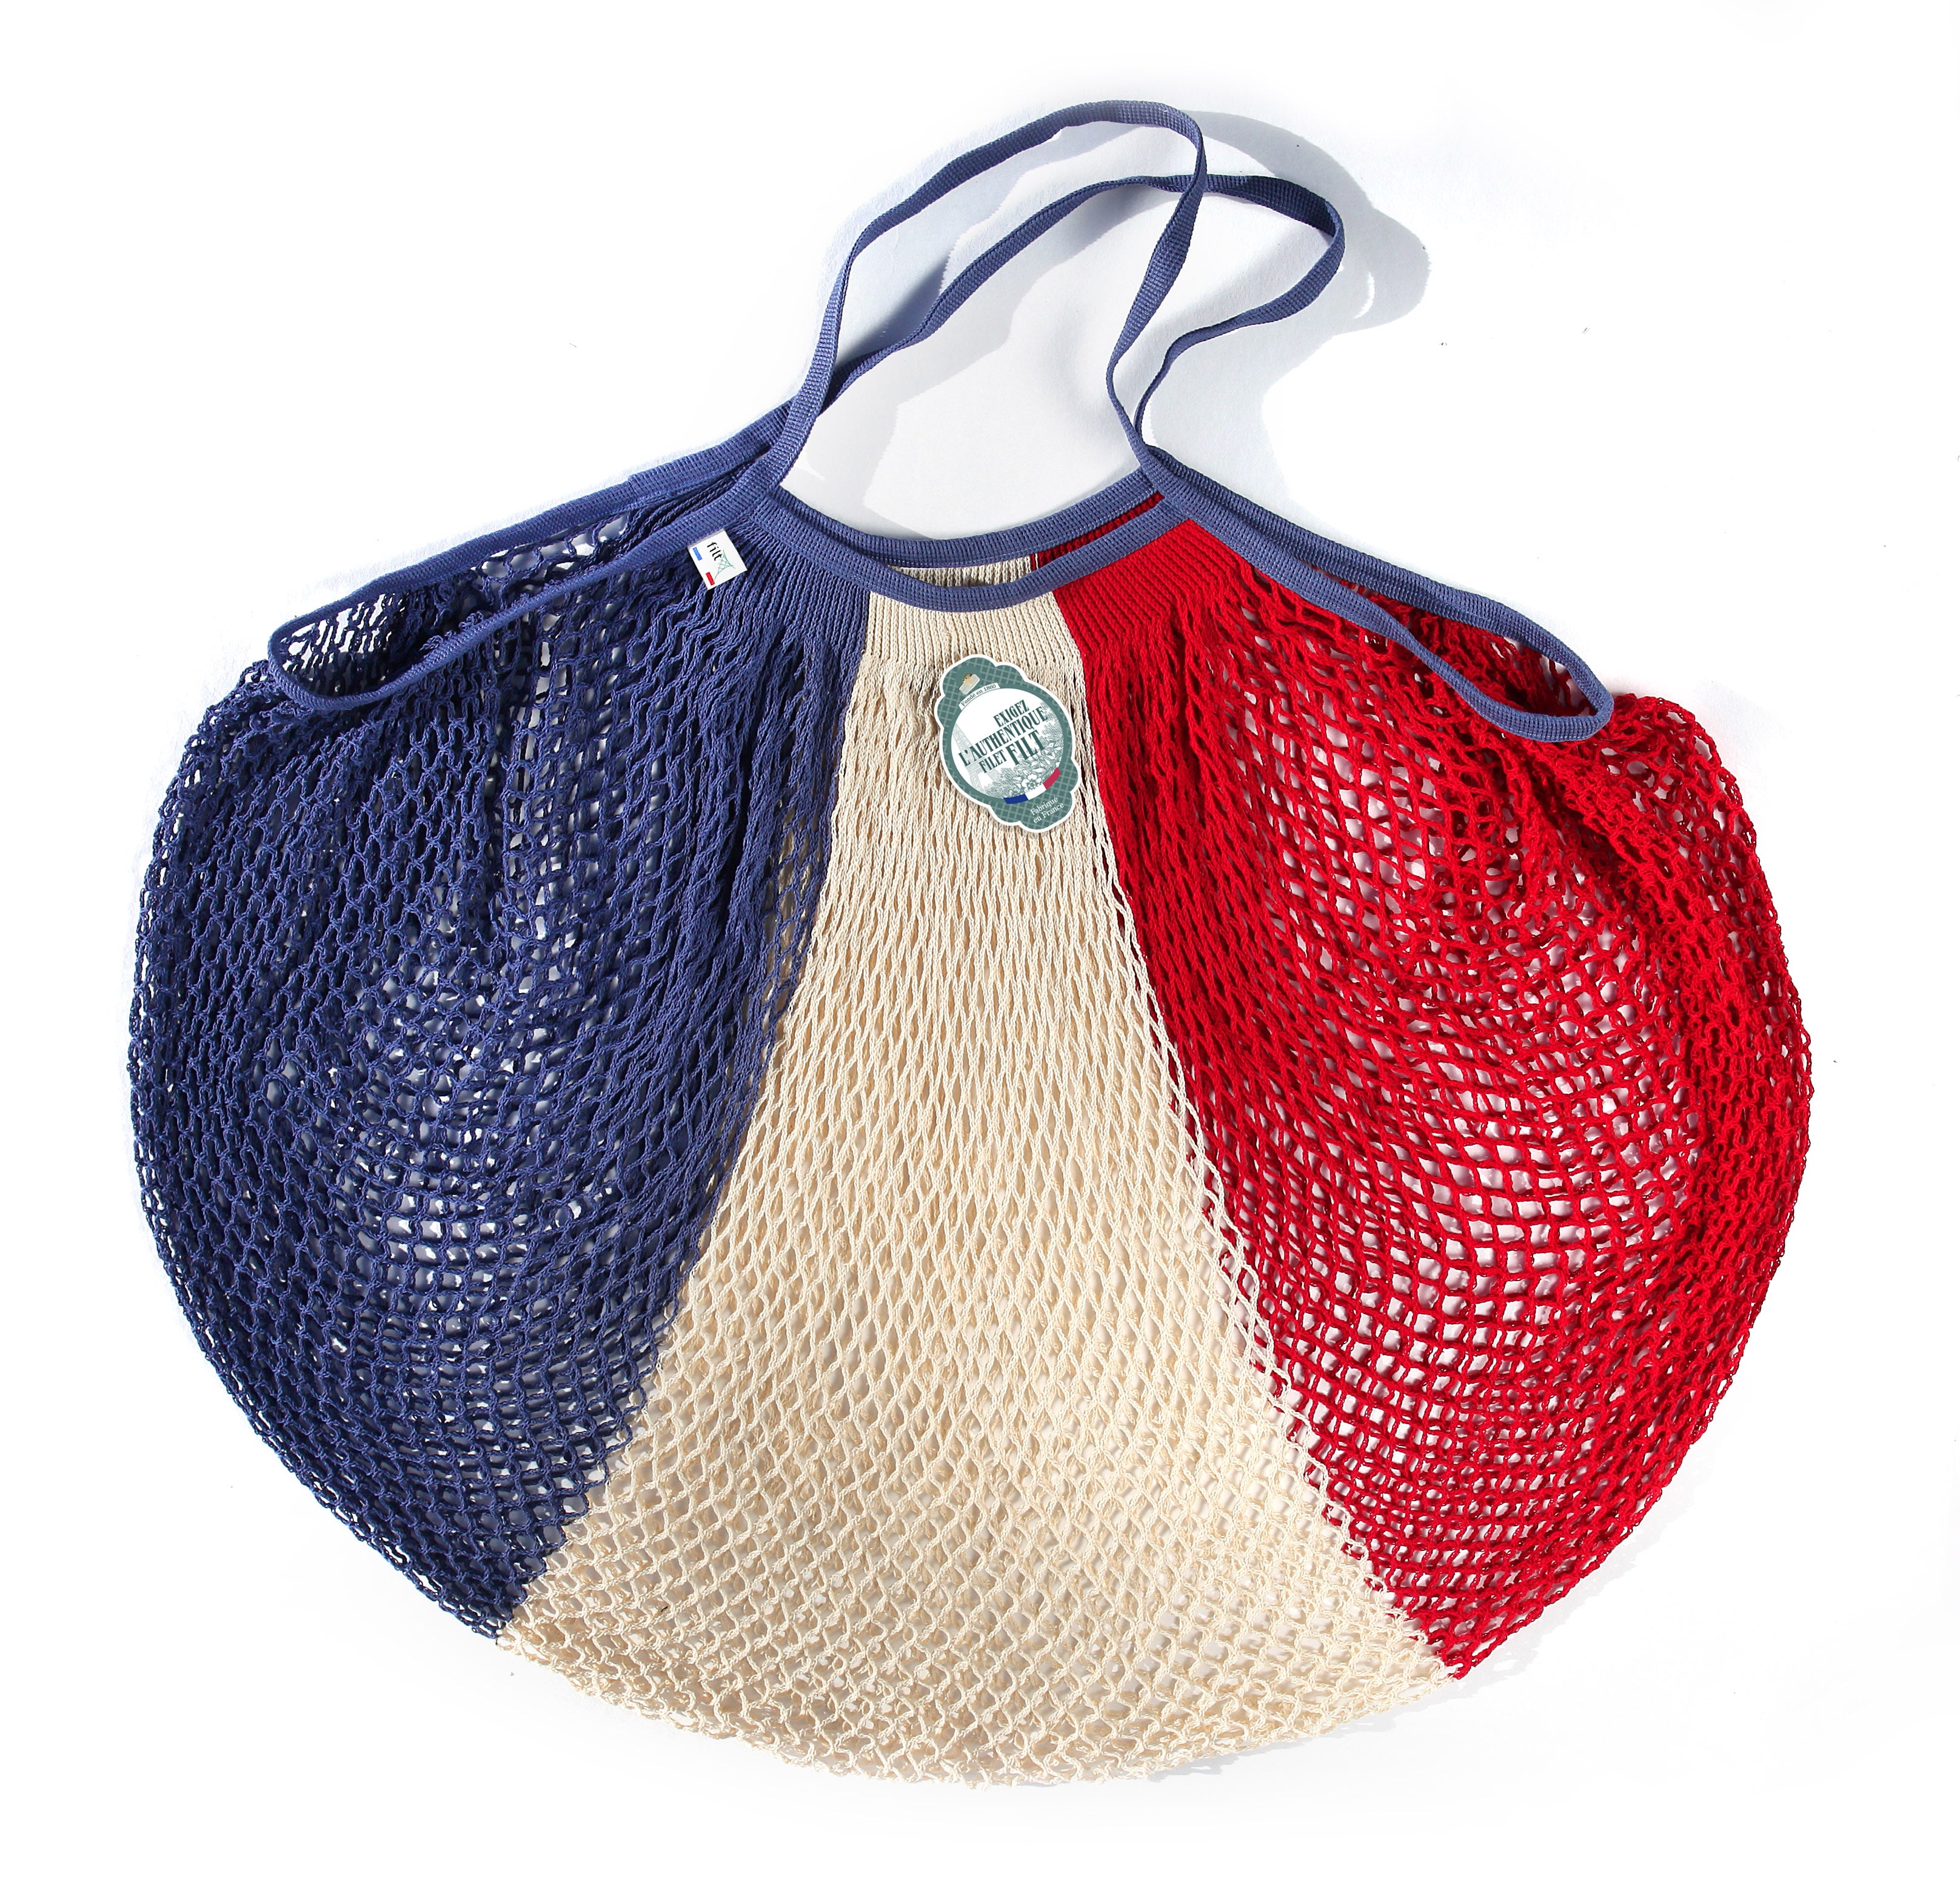 Filt Large Bag in Red, White, and Blue Bag Filt Bags Brand_Filt Shopping Bags Textiles_Shoppers 230_BBR